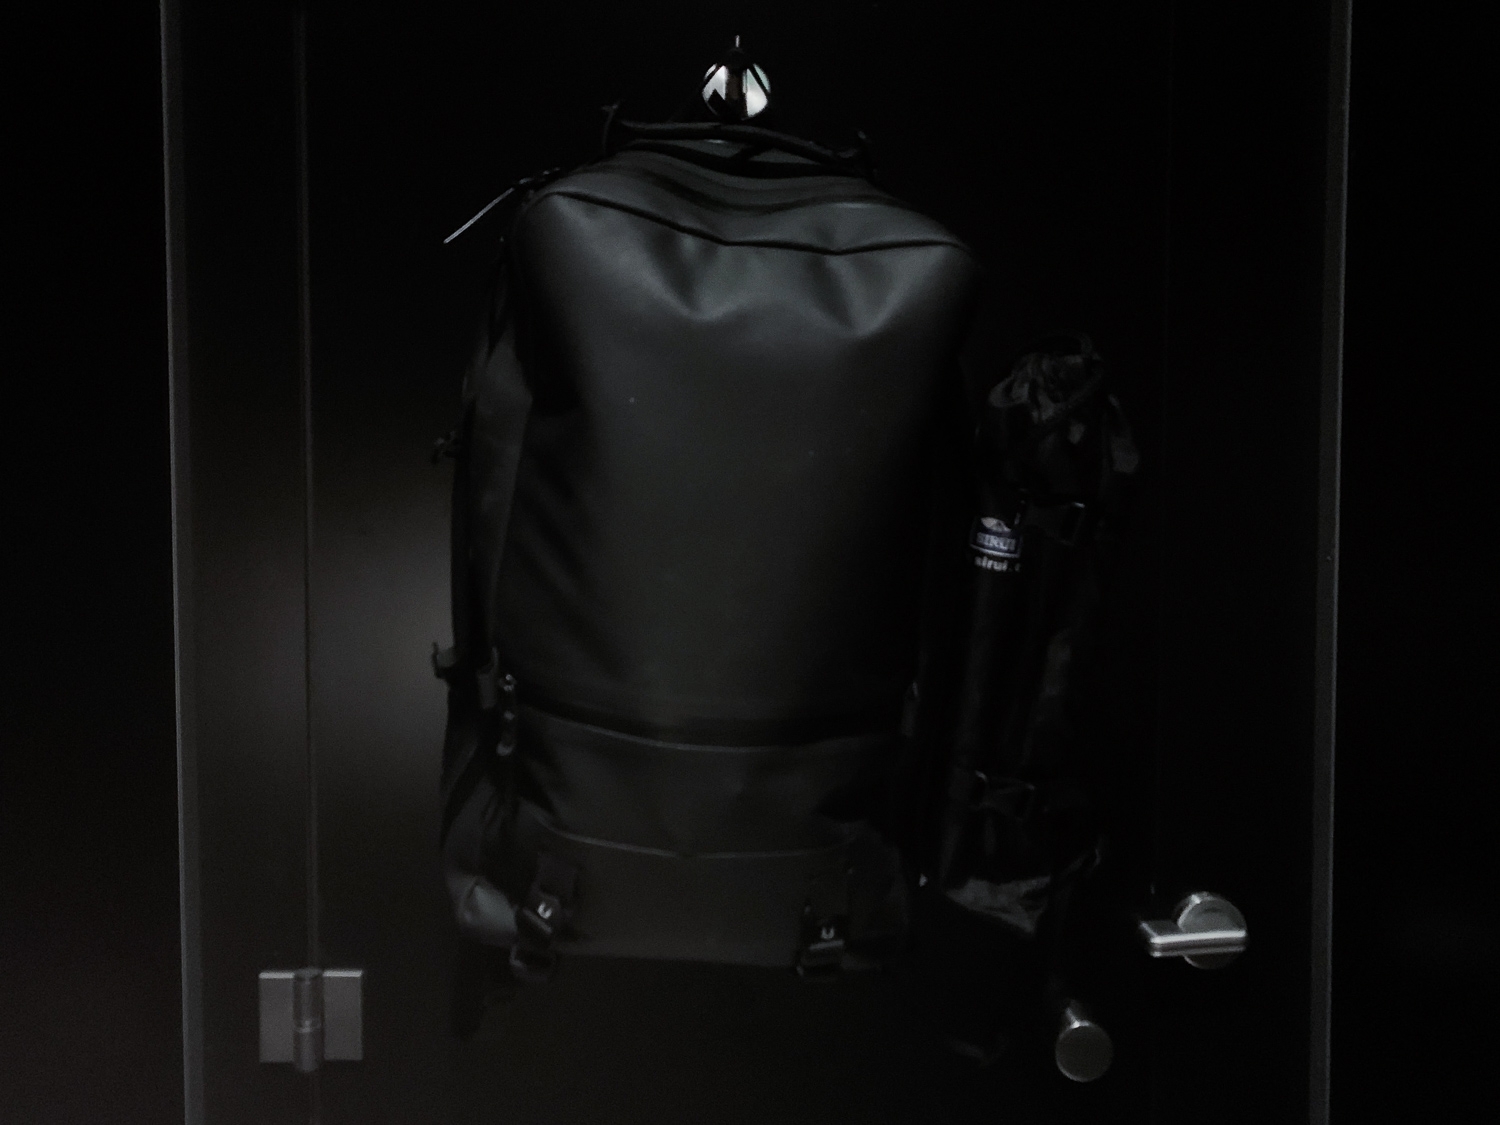 Even the tones are kept consistent on this black minimalist backpack.